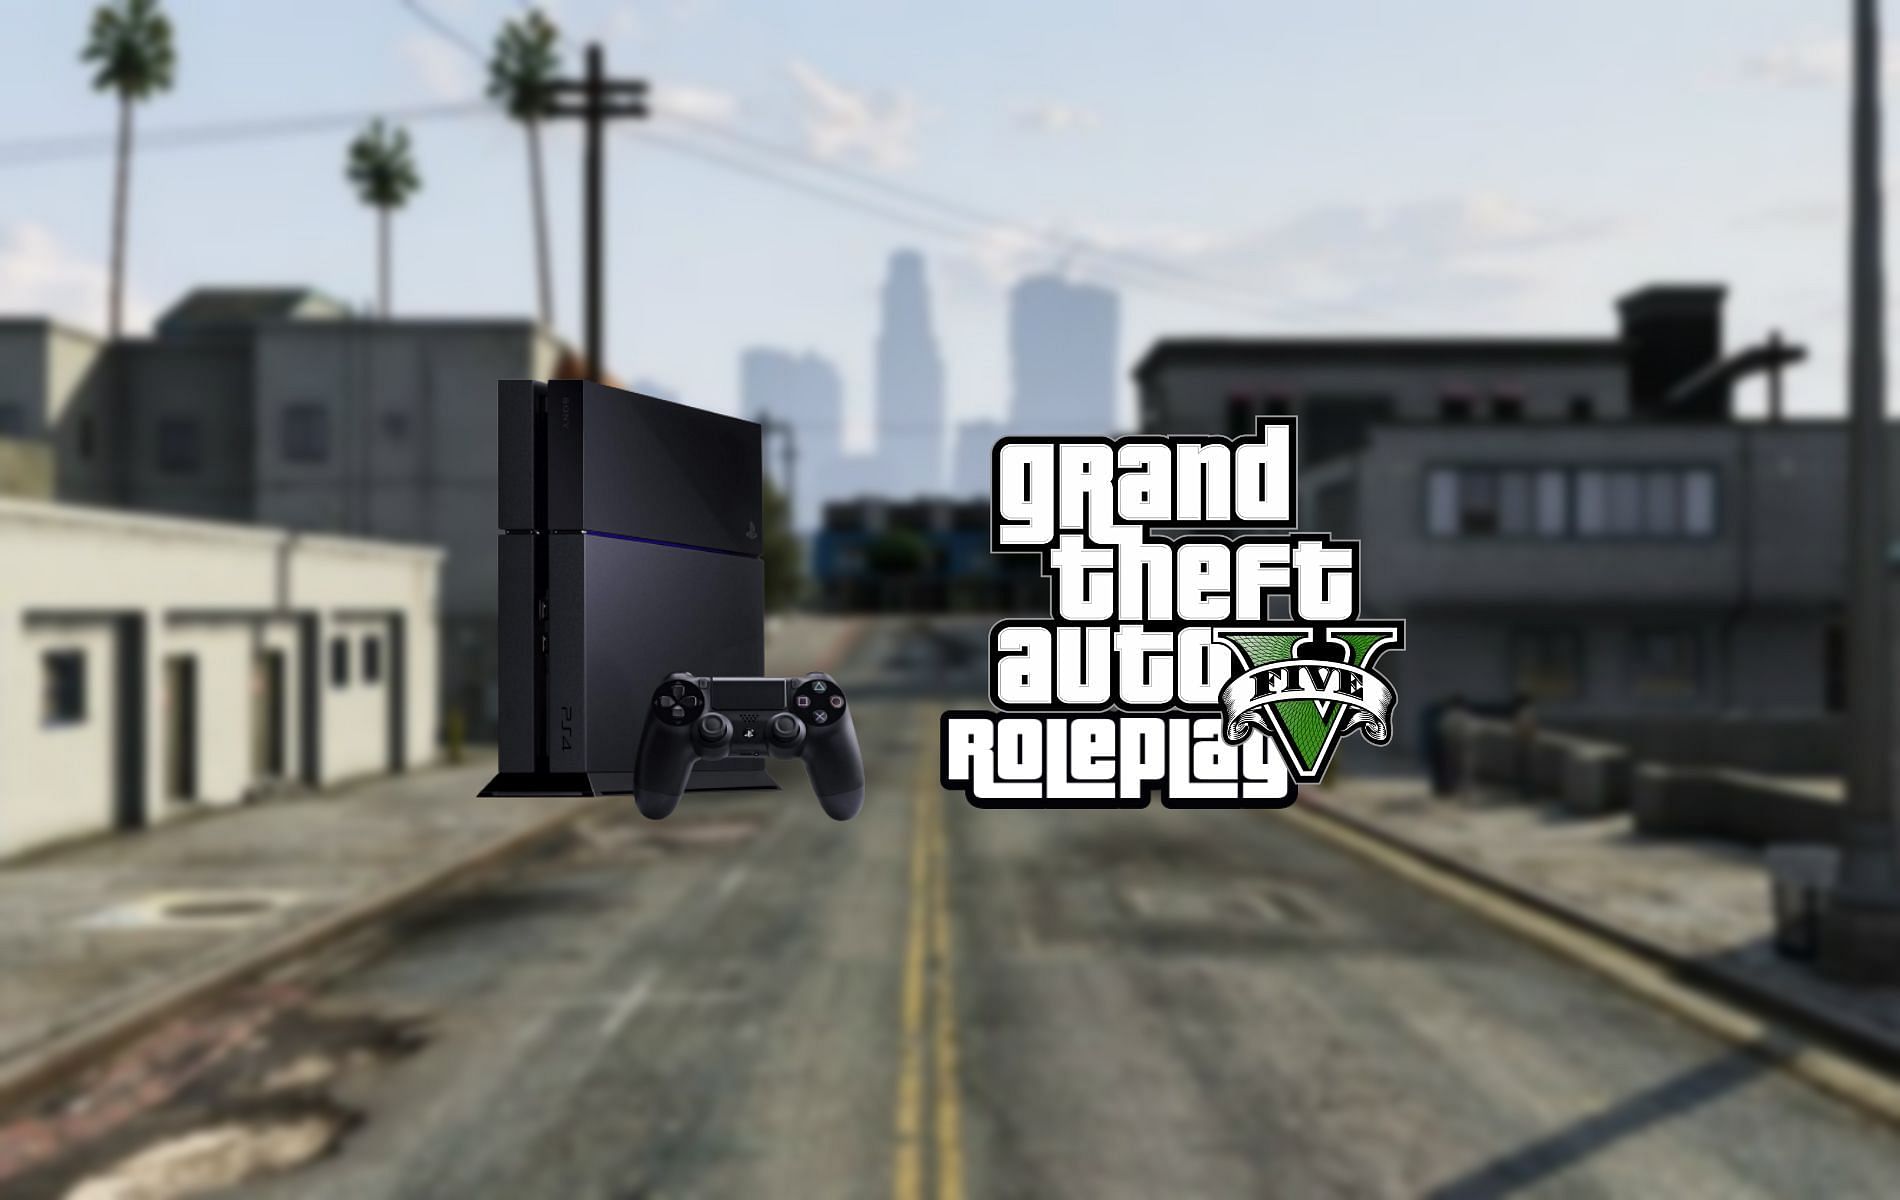 HOW TO DOWNLOAD GRAND RP, HOW TO DOWNLOAD GTA RP ON PC